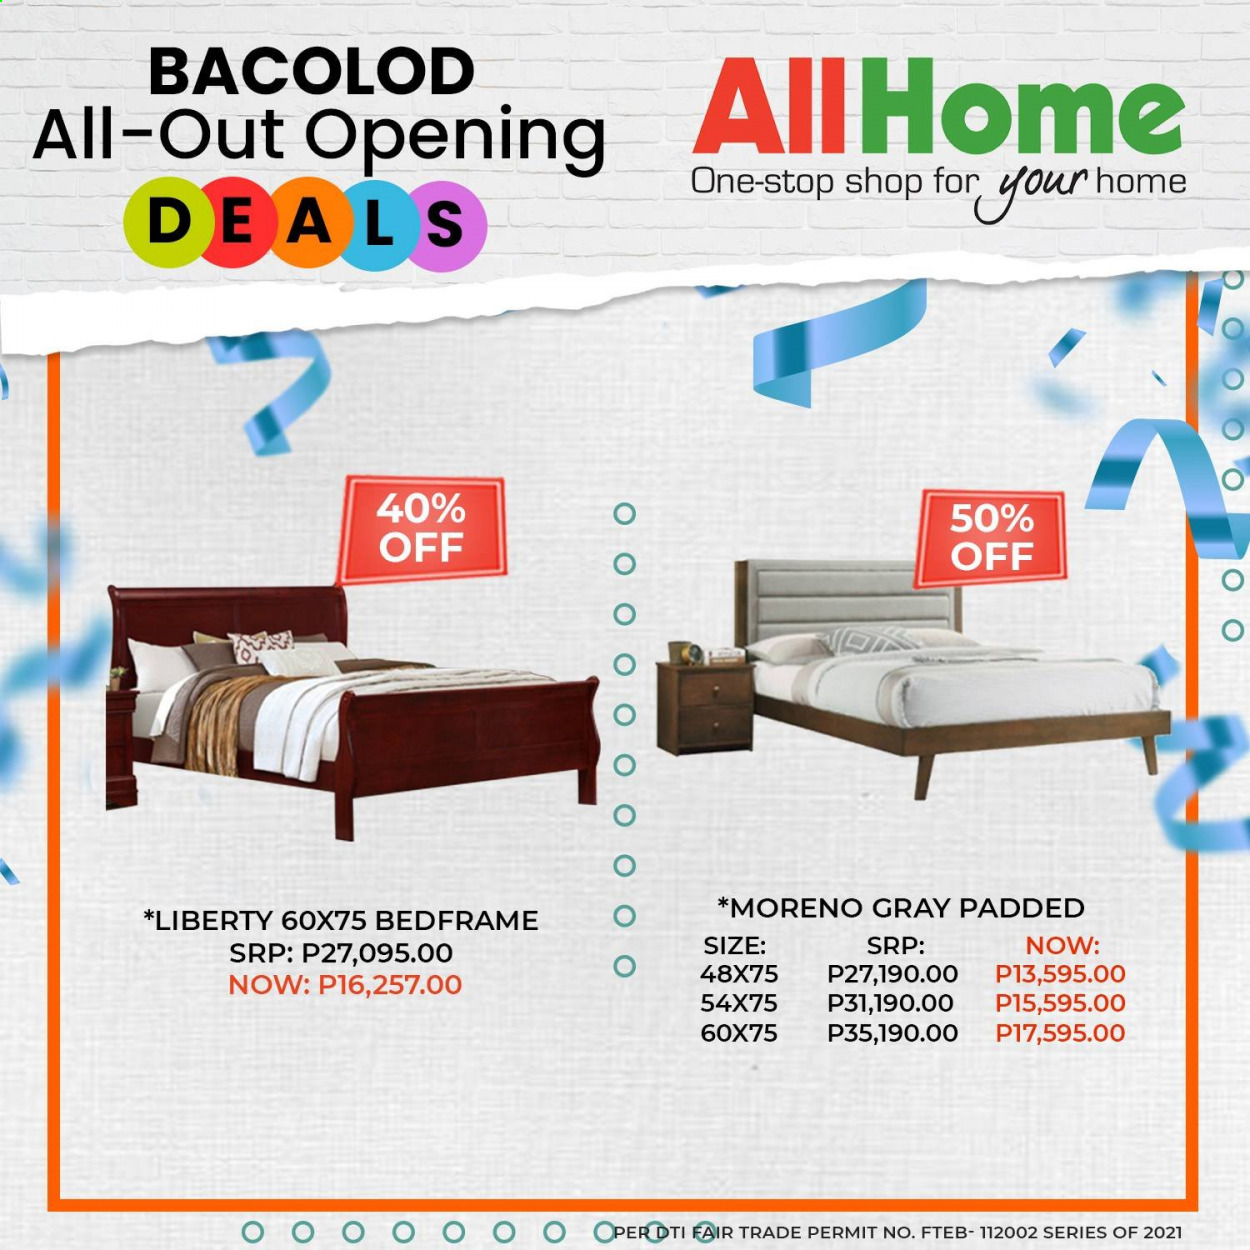 thumbnail - AllHome offer.